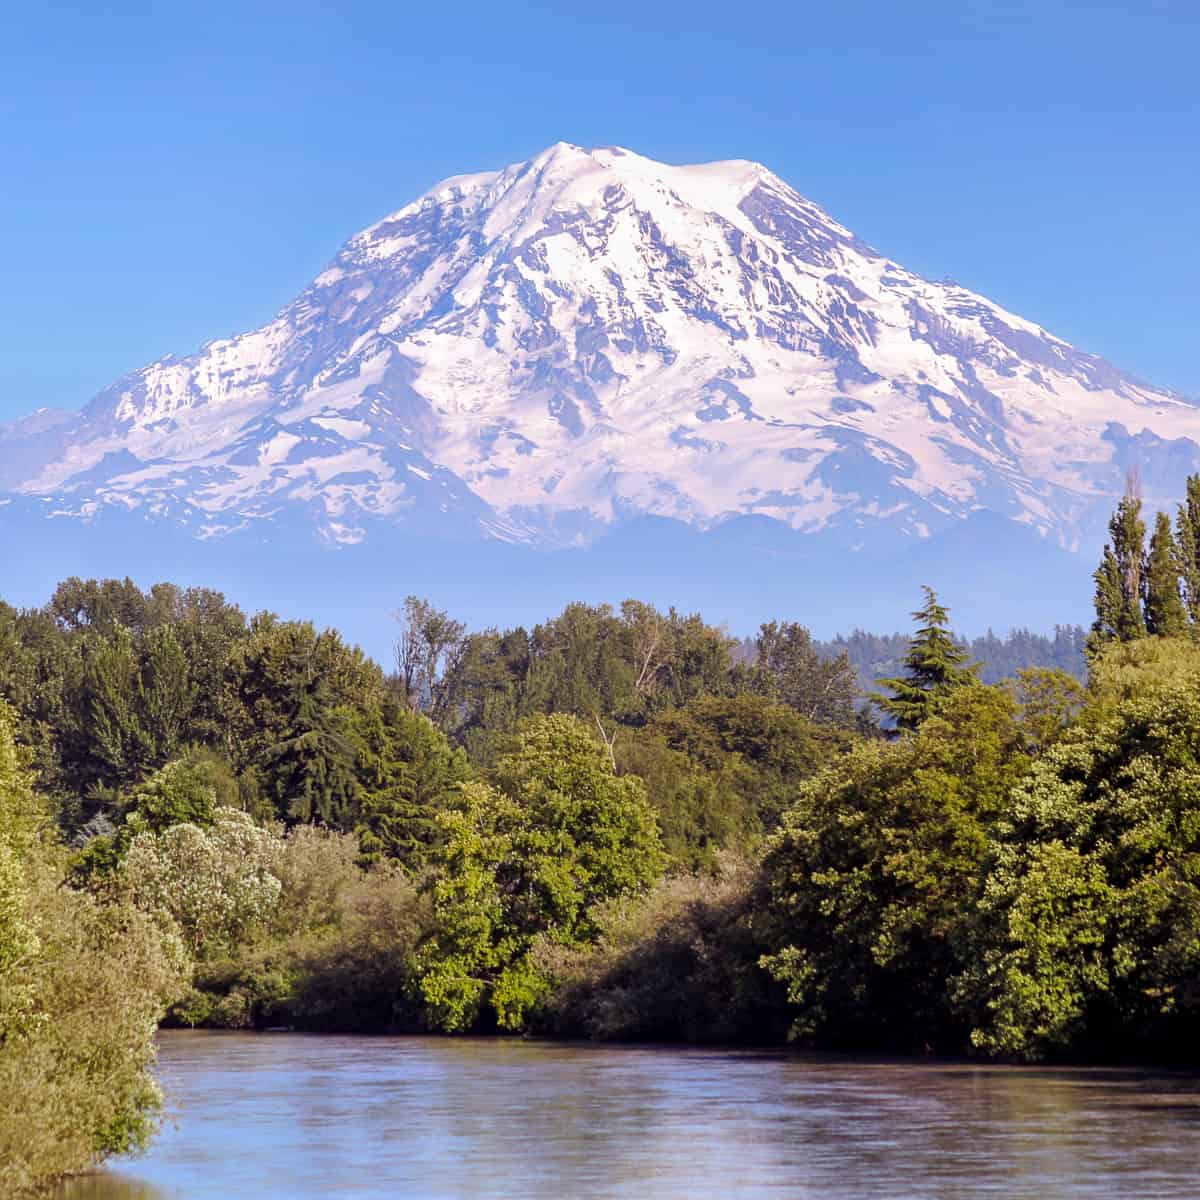 Mt Rainier View from Puyallup River (Photo)